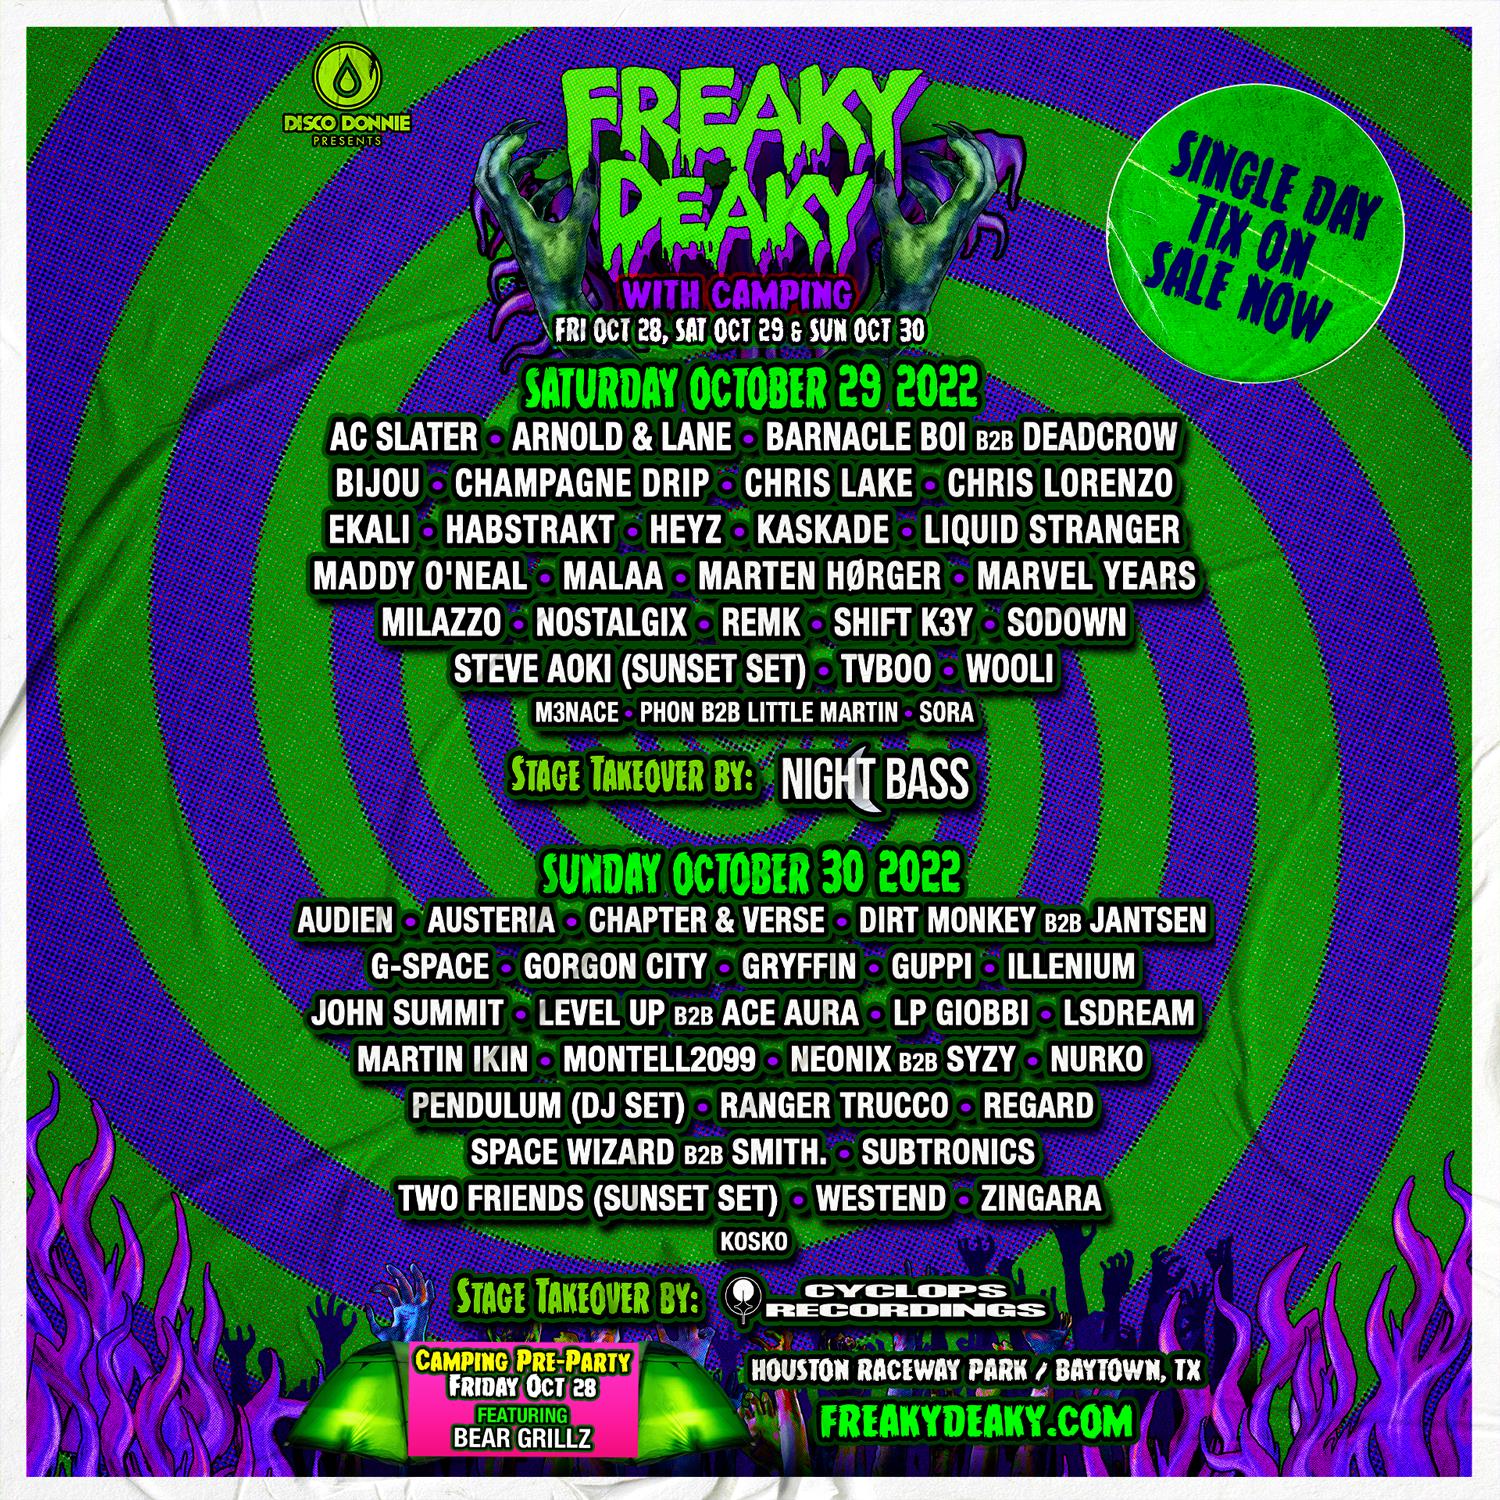 Buy Tickets to Freaky Deaky 2022 in Baytown on Oct 28, 2022 Oct 30,2022